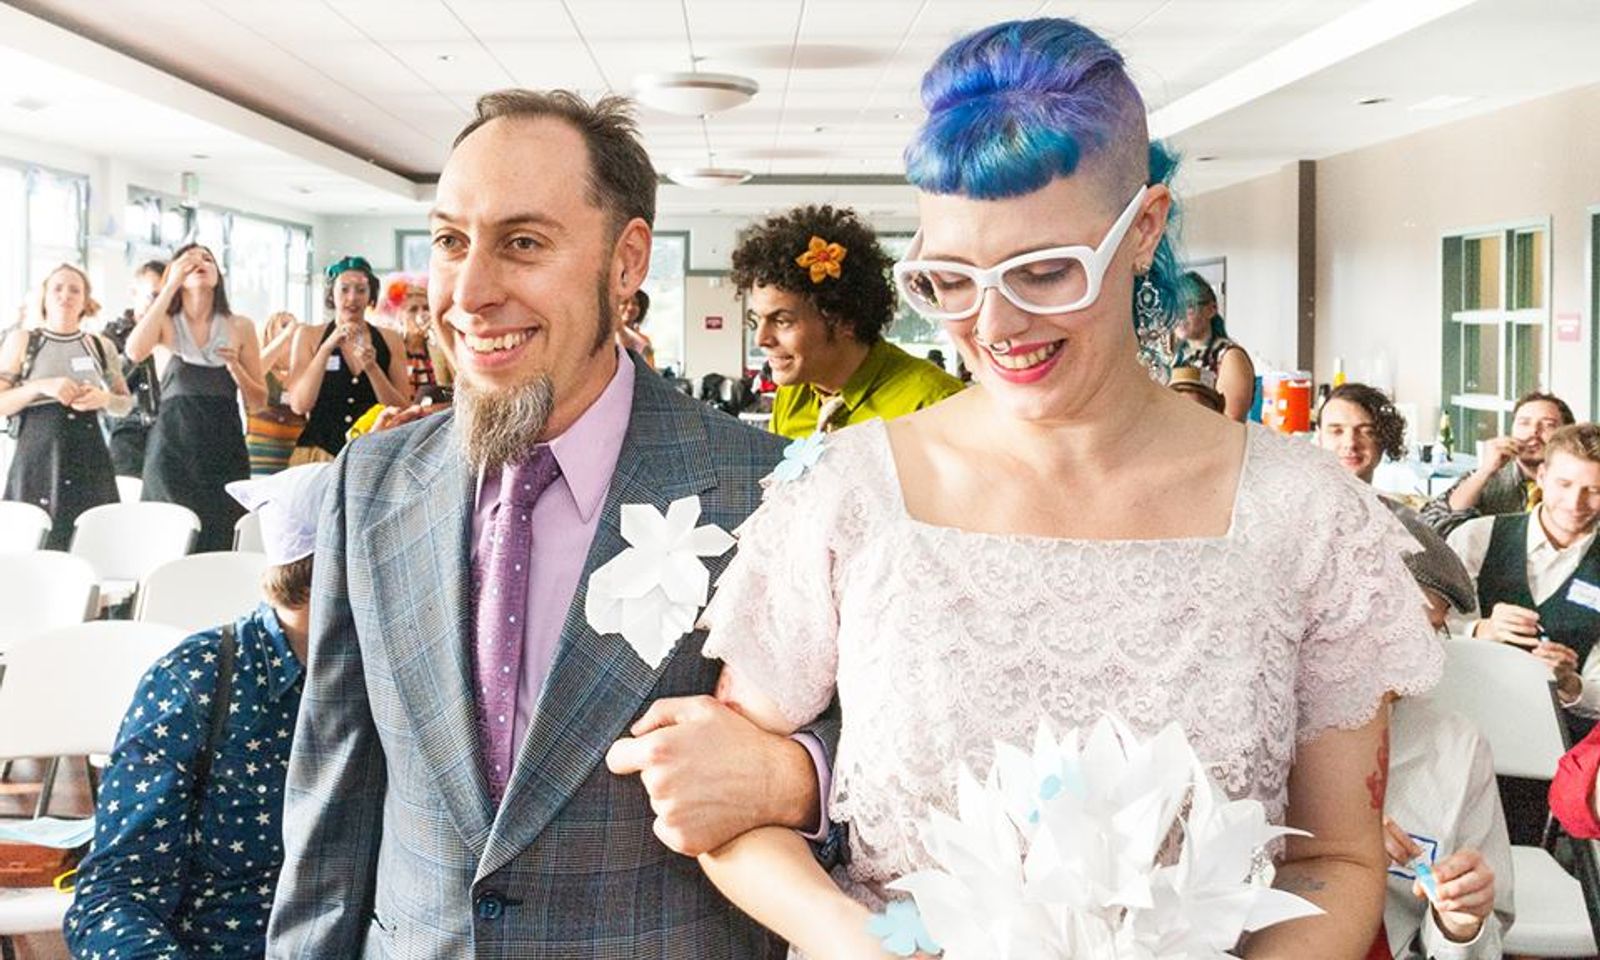 My partner and I walking down the aisle arm in arm carrying a paper flower bouquet